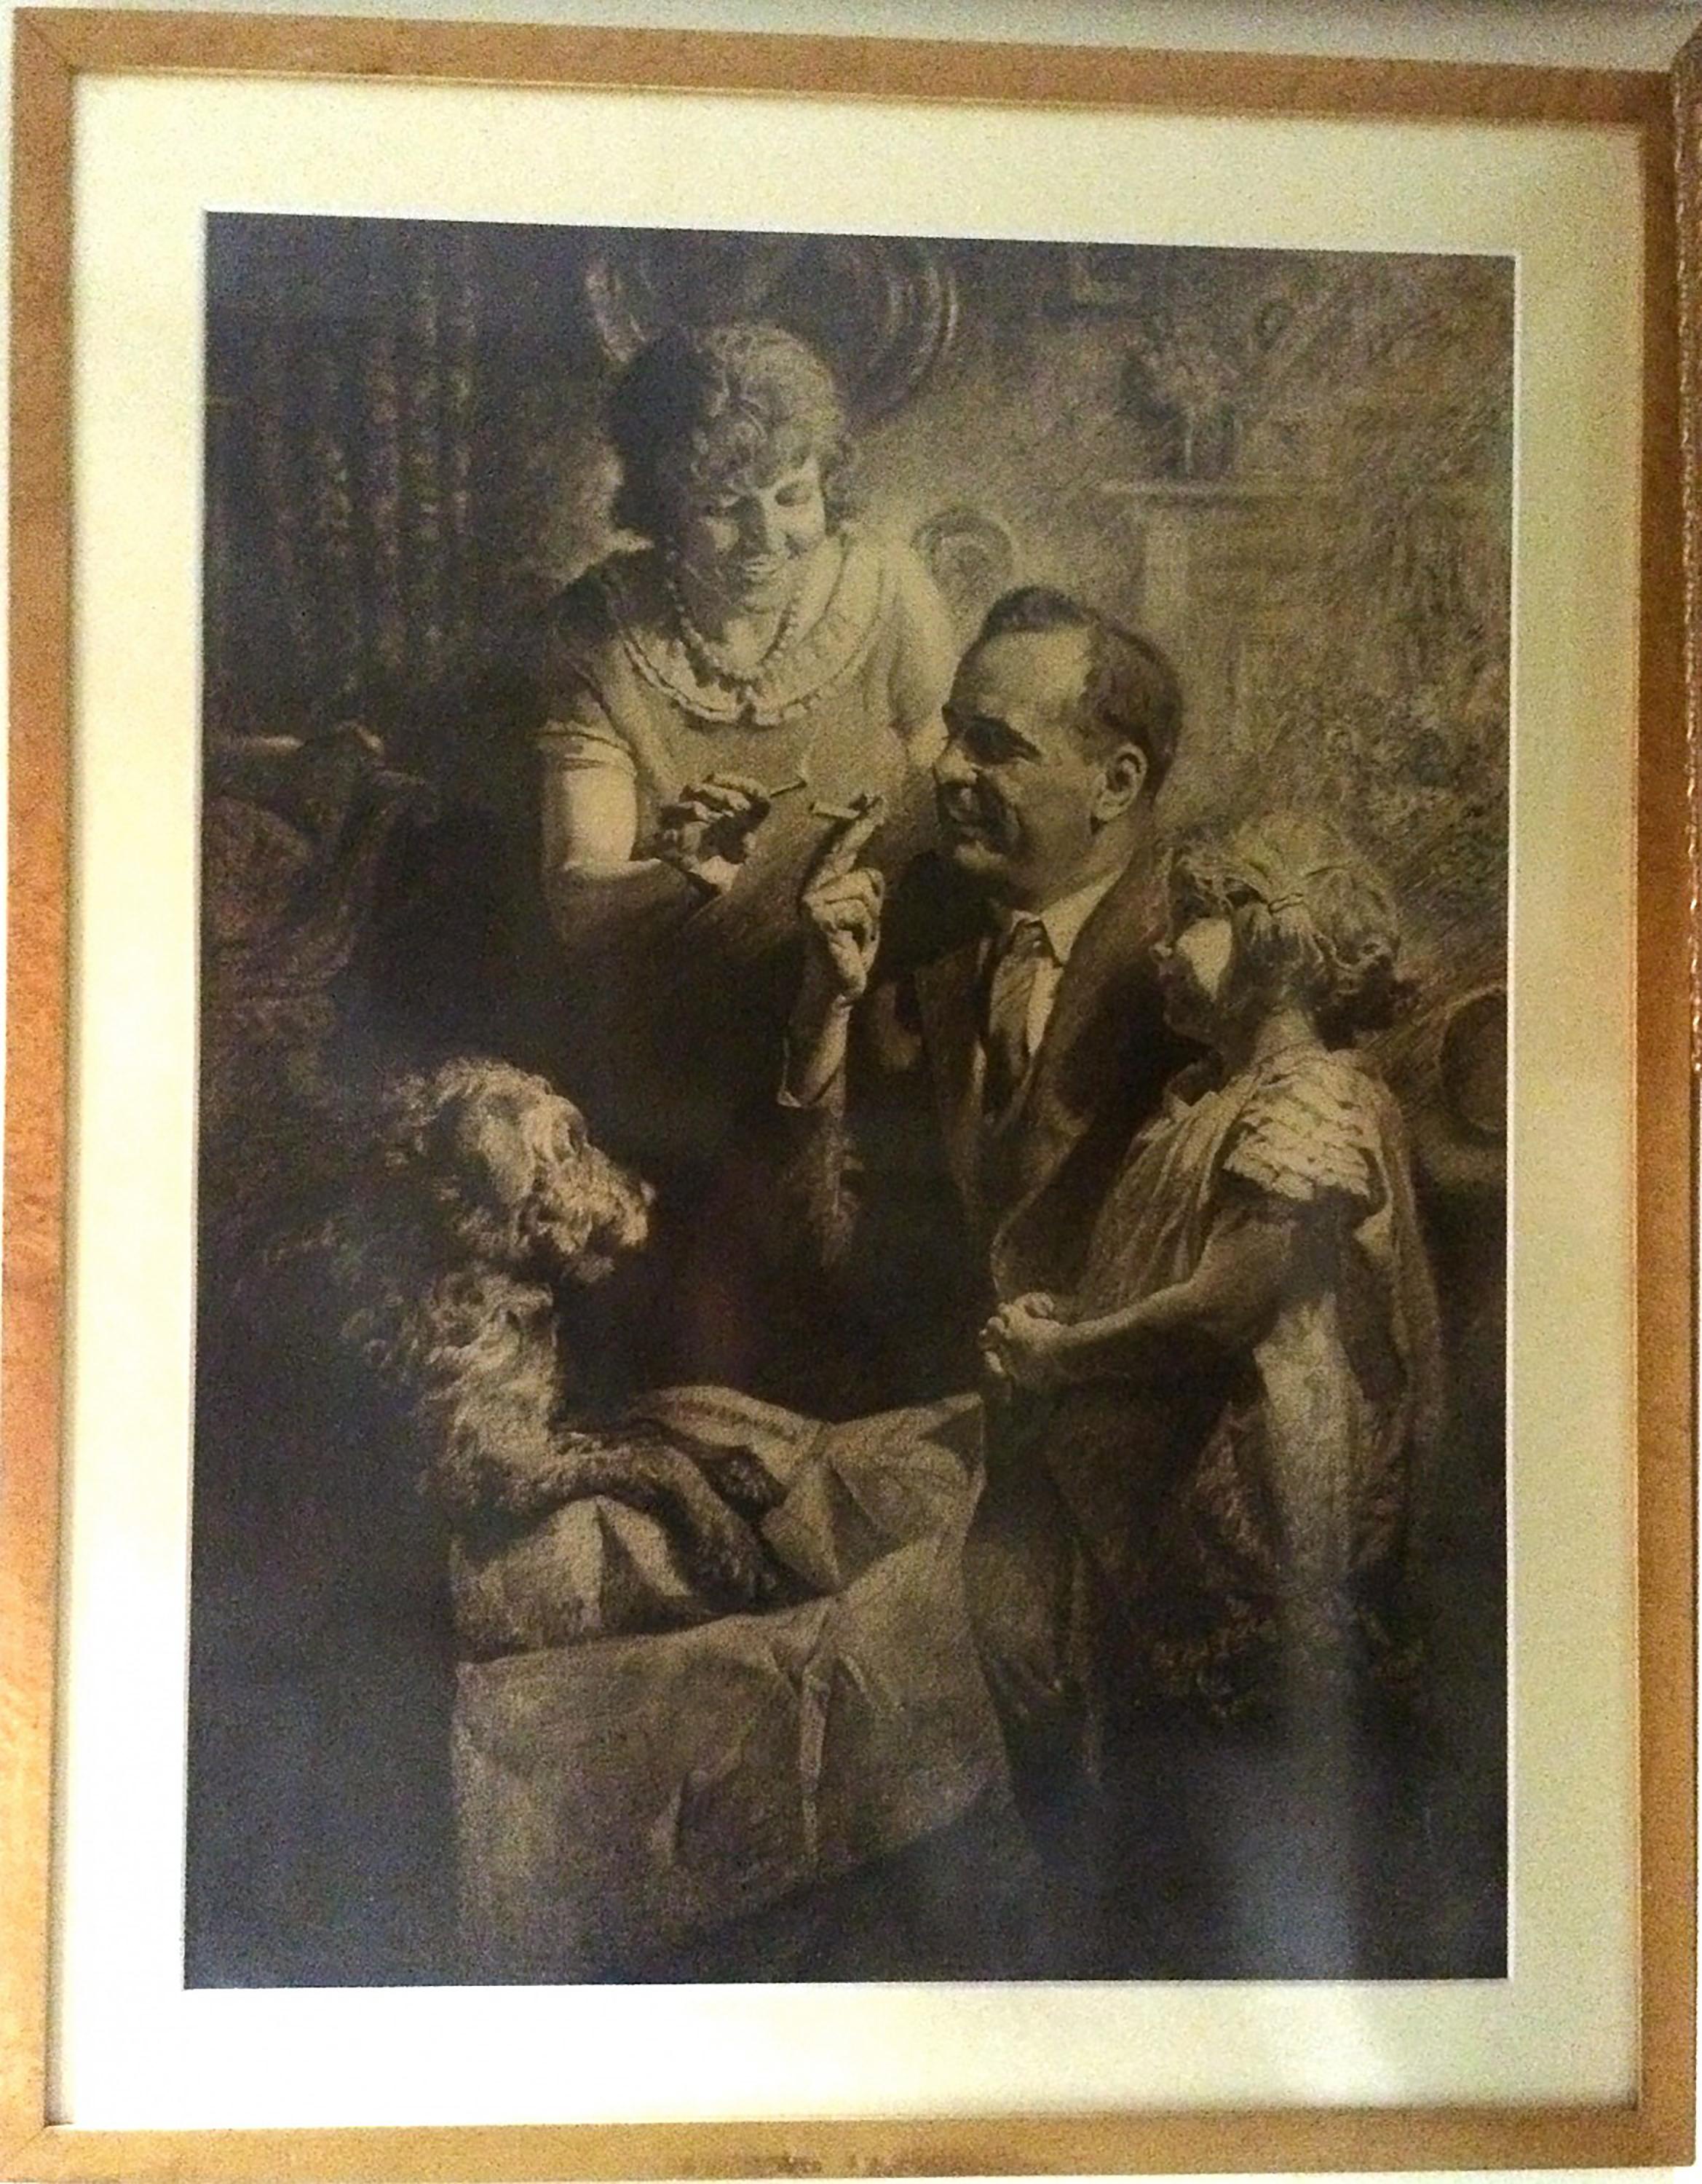 Father Smoking a Cigarette Surrounded by Family - Art by Leone M. Bracker